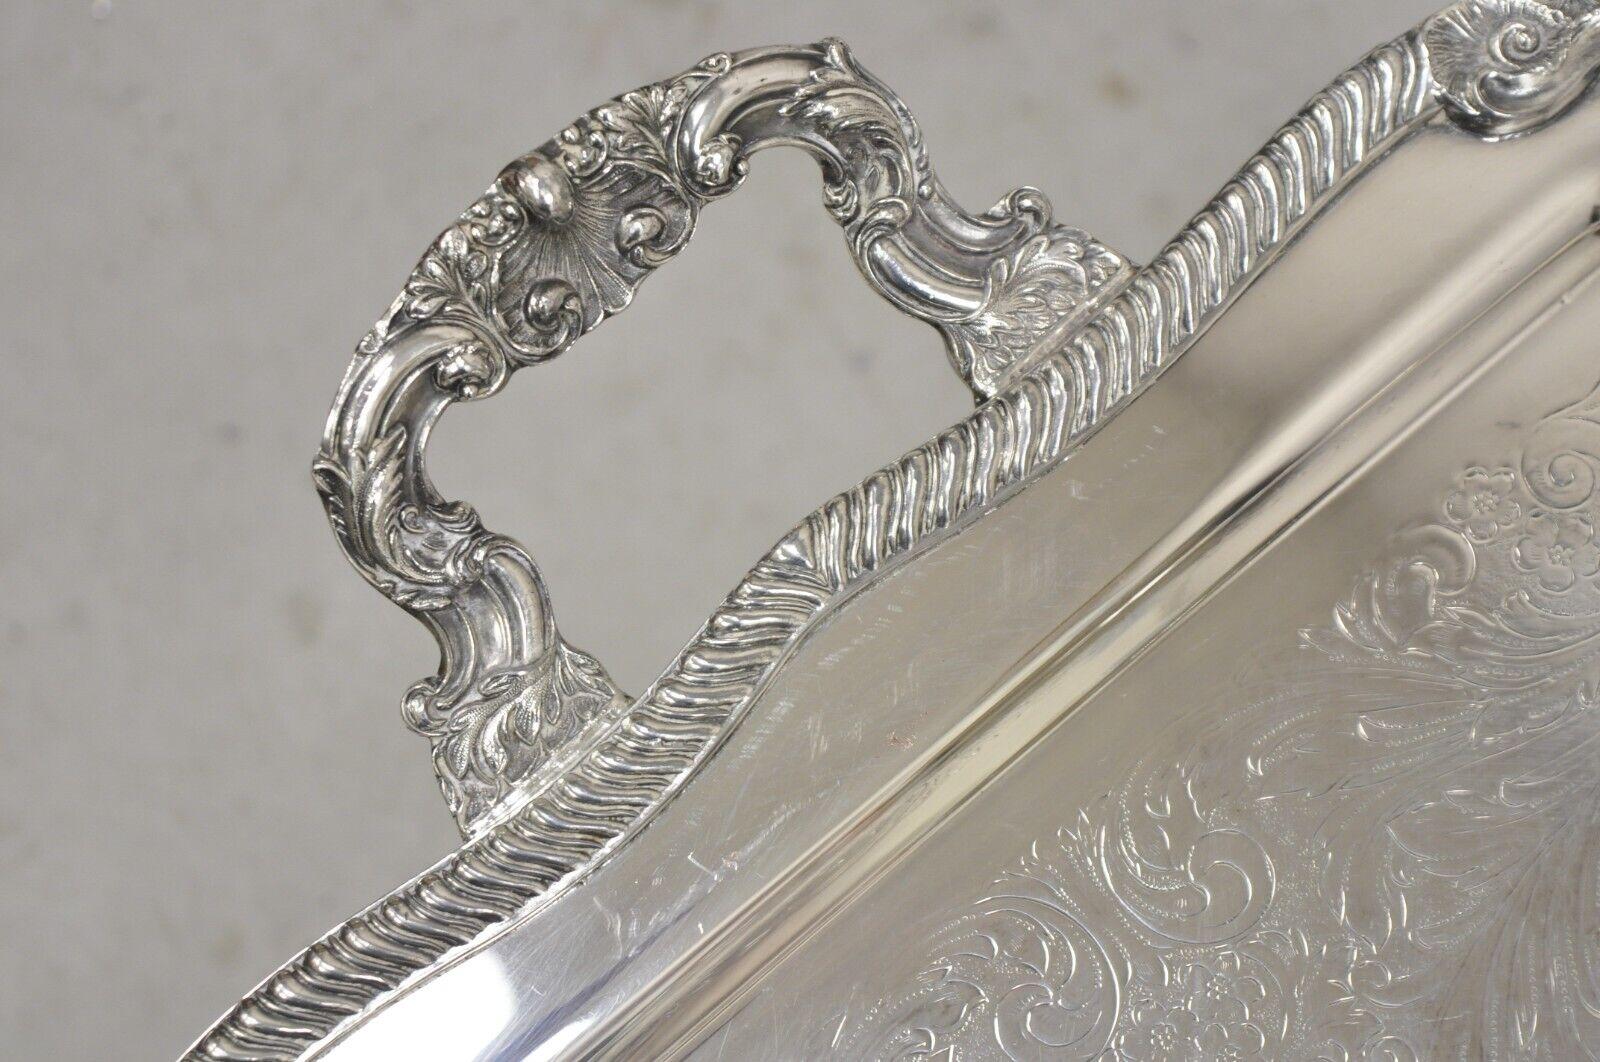 20th Century Sheridan Large Ornate Silver Plated English Victorian Style Serving Platter Tray